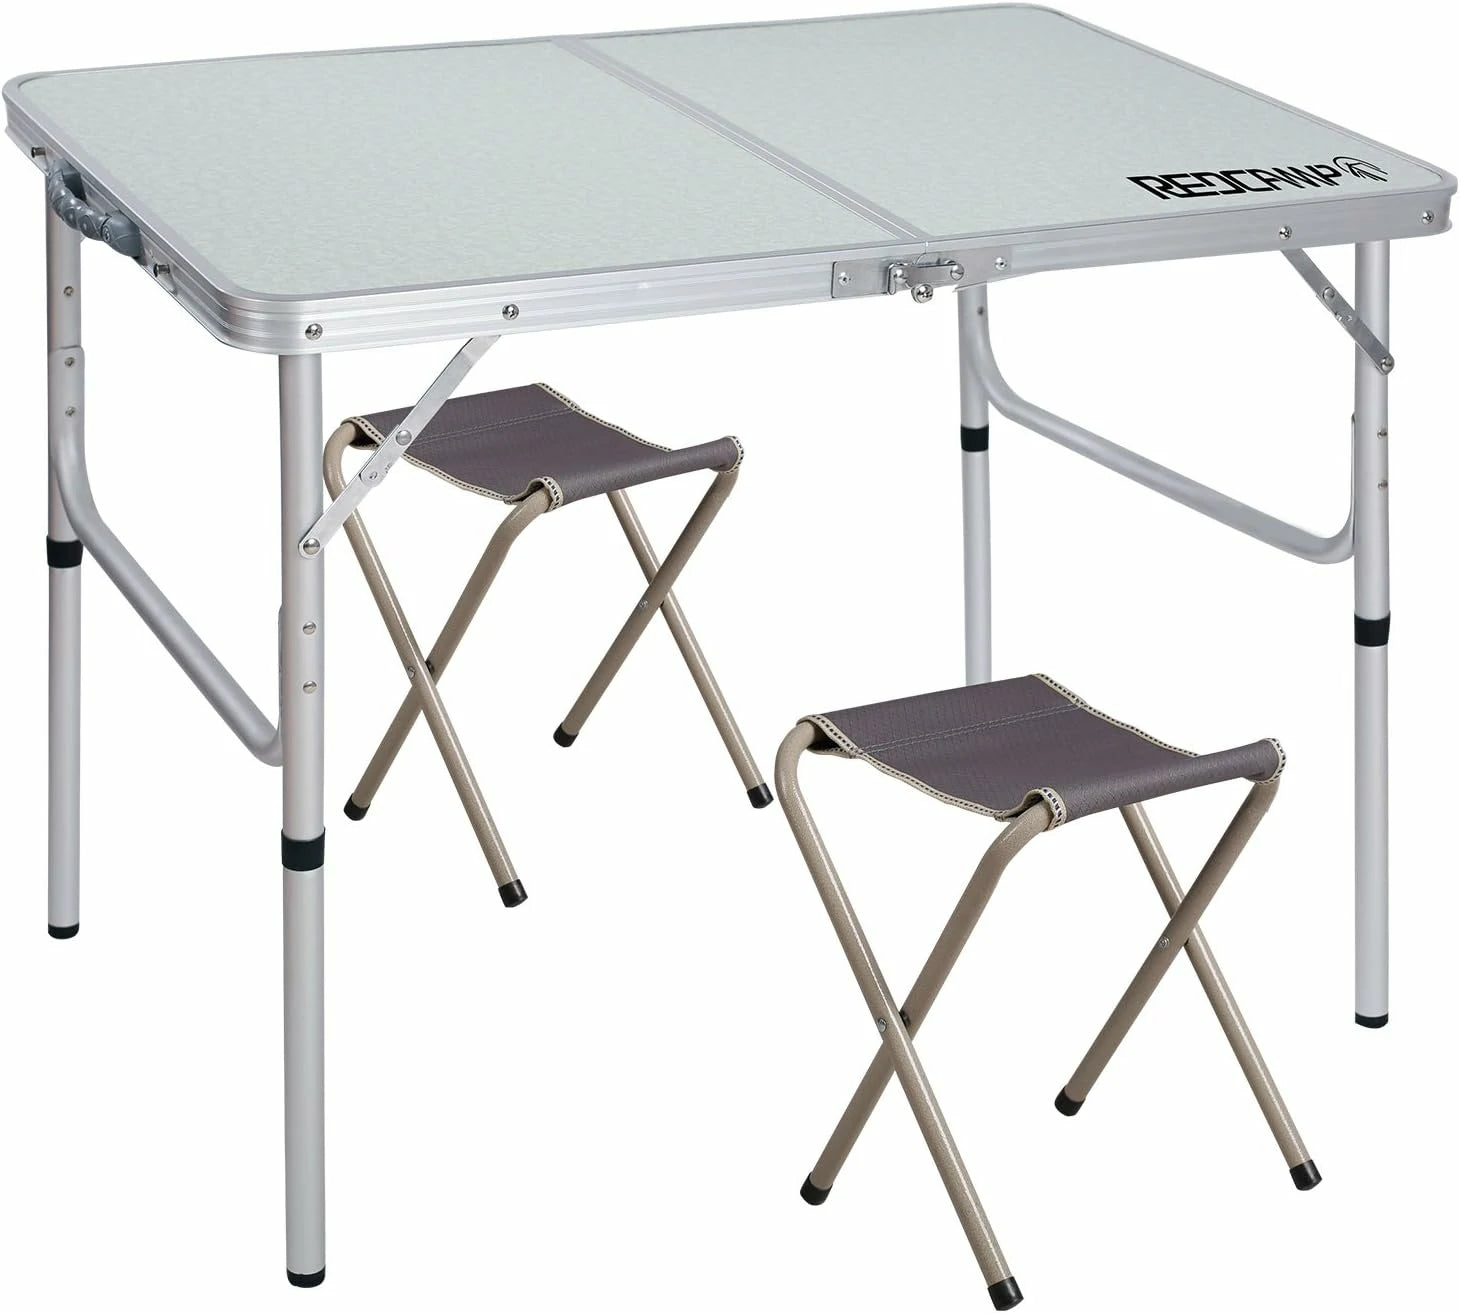 REDCAMP Folding Camping Table Adjustable